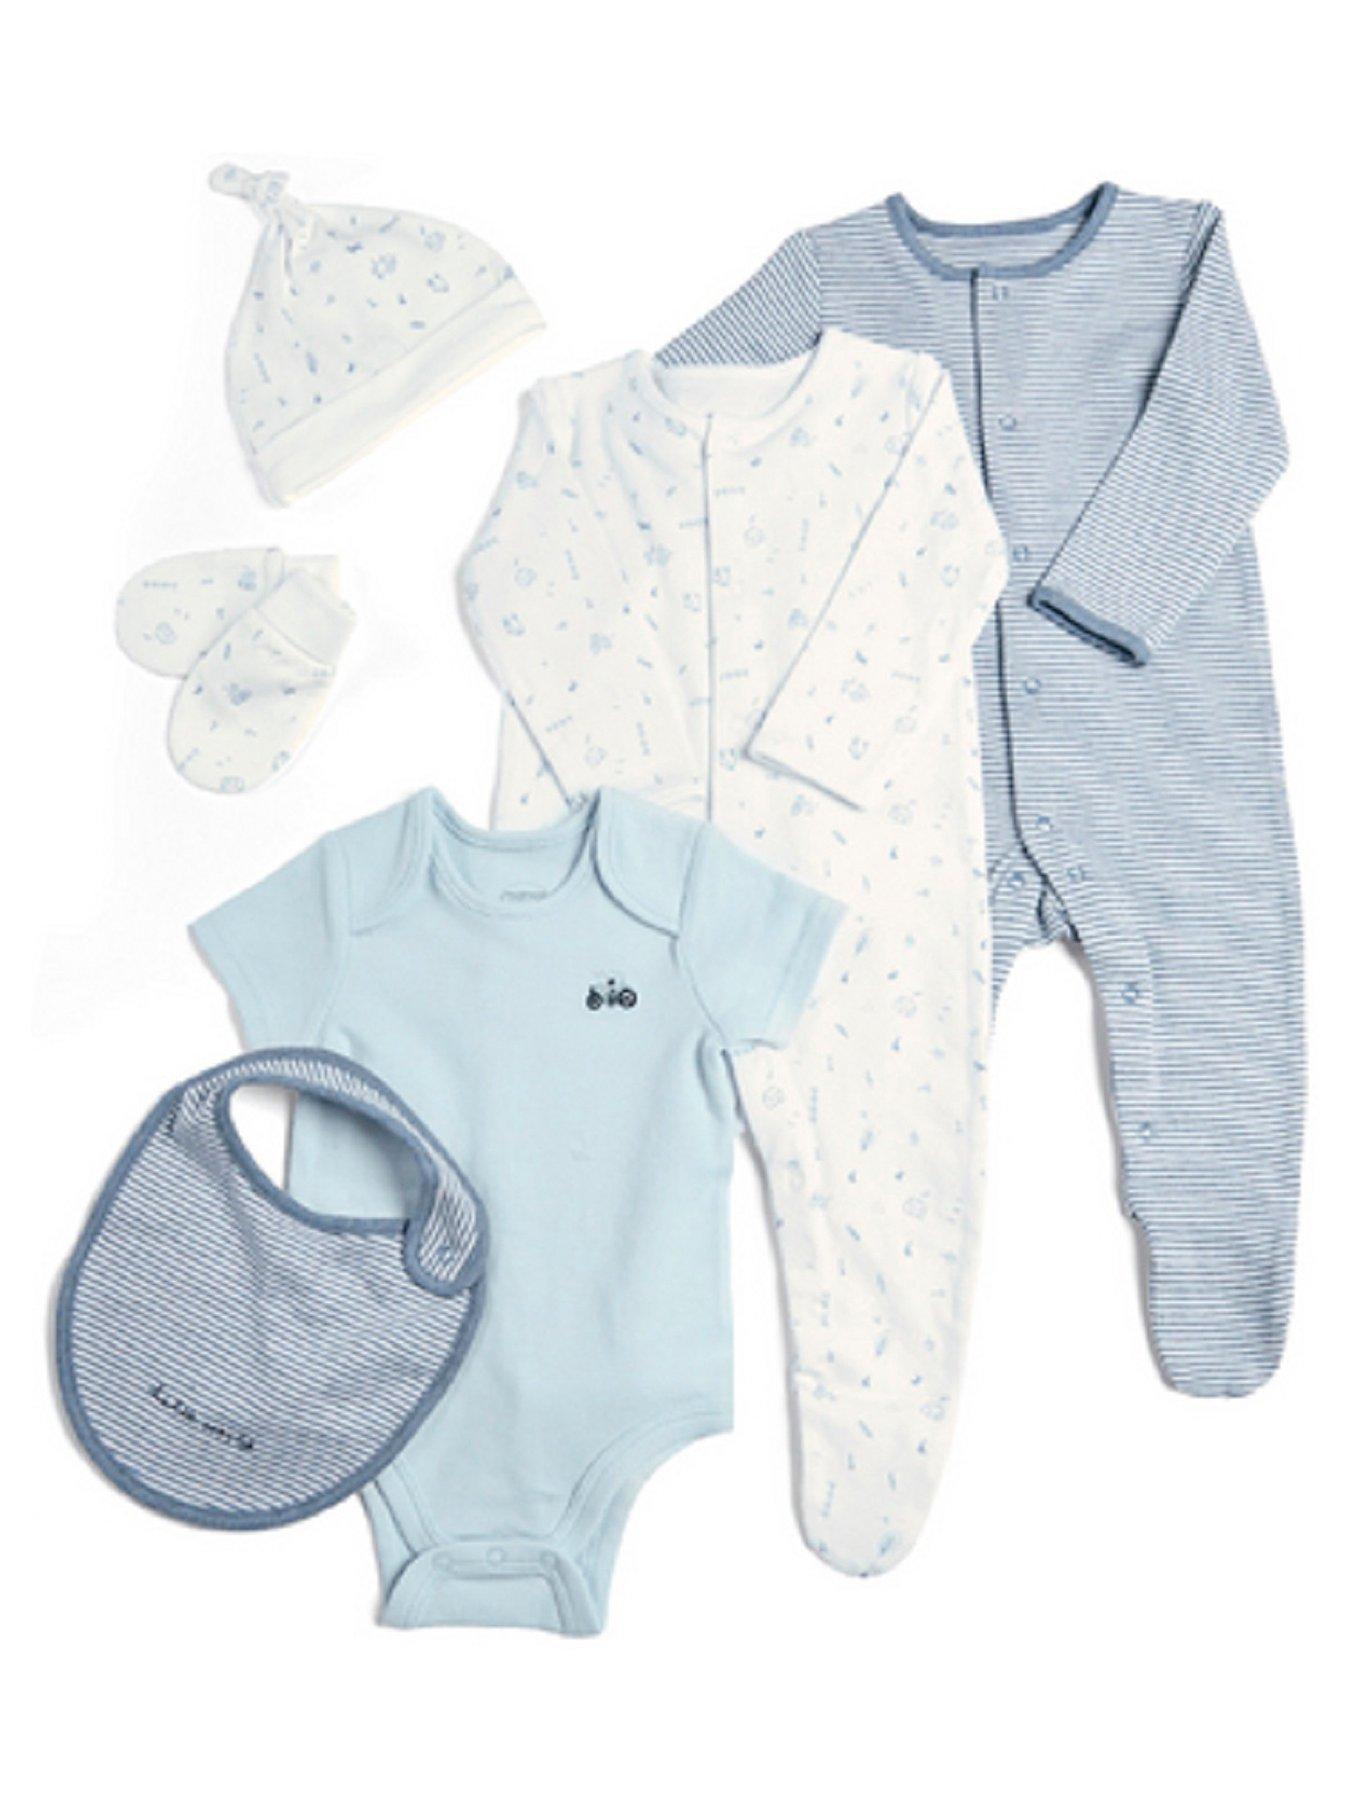 mamas and papas baby boy occasion wear